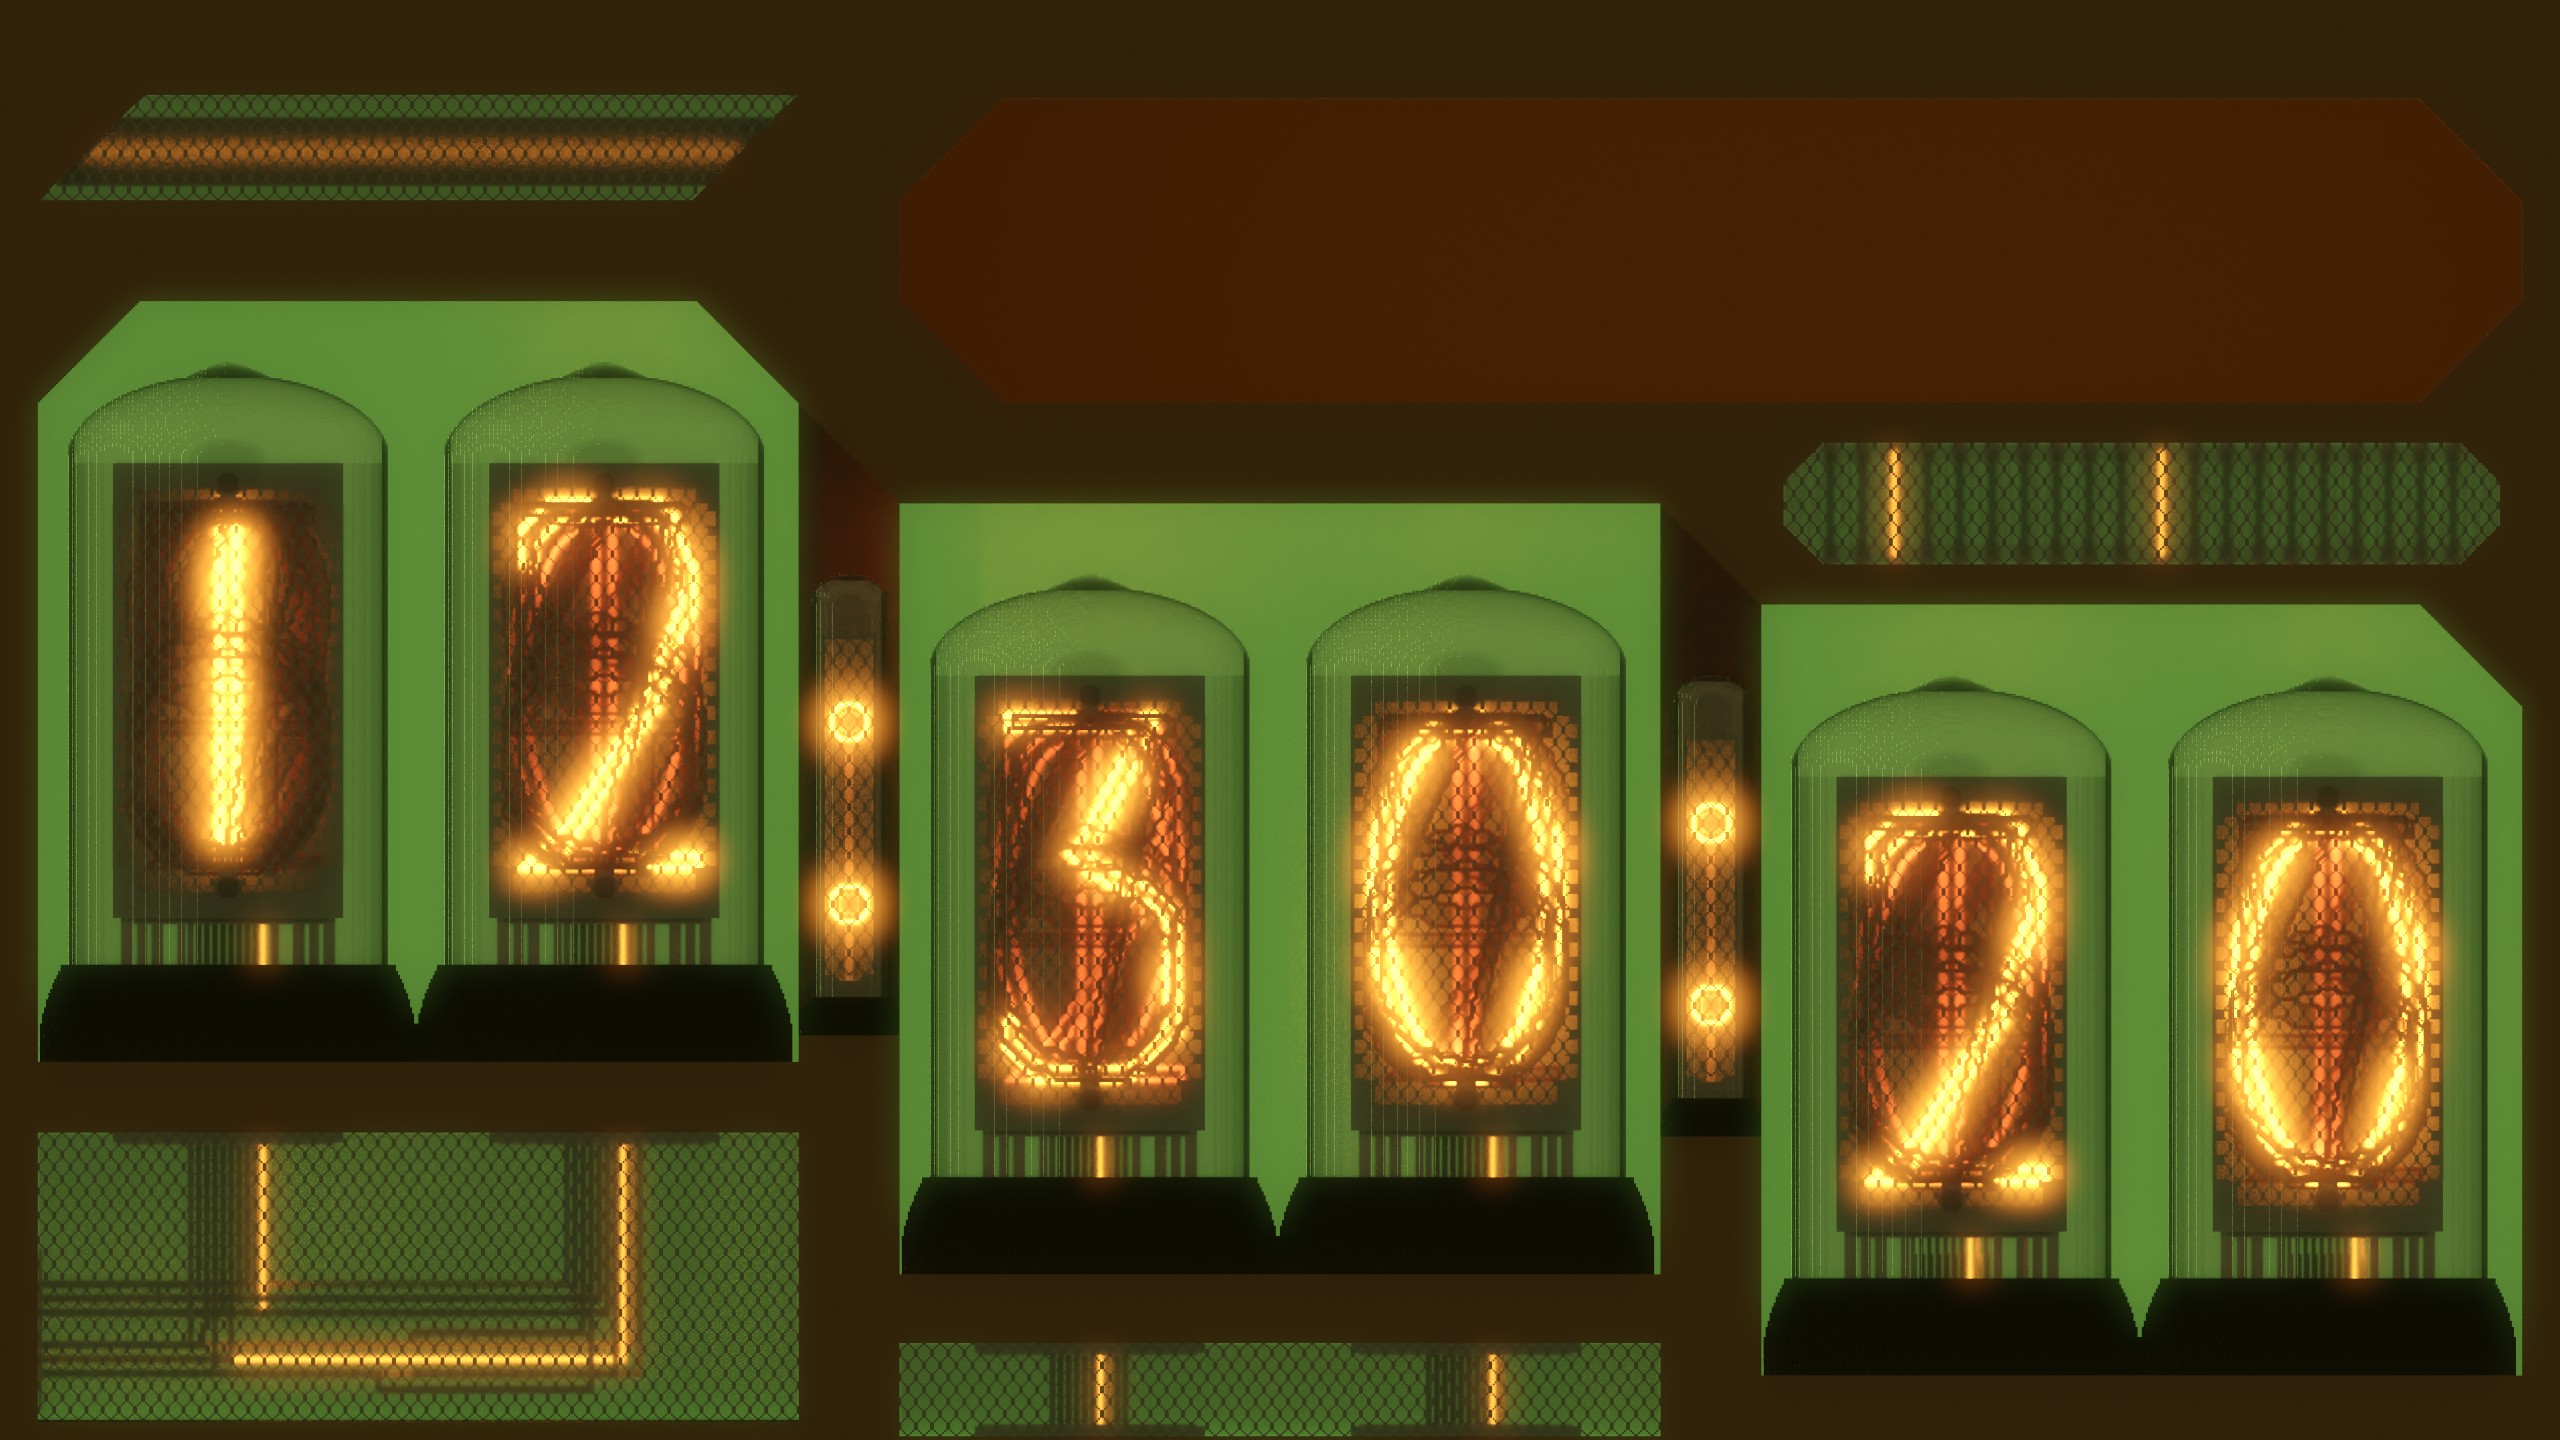 Avoyd Nixie Tubes Clock made by by PotatoVonEpicus. Imported in Avoyd and rendered with Bloom and AgX Tonemapping post processing